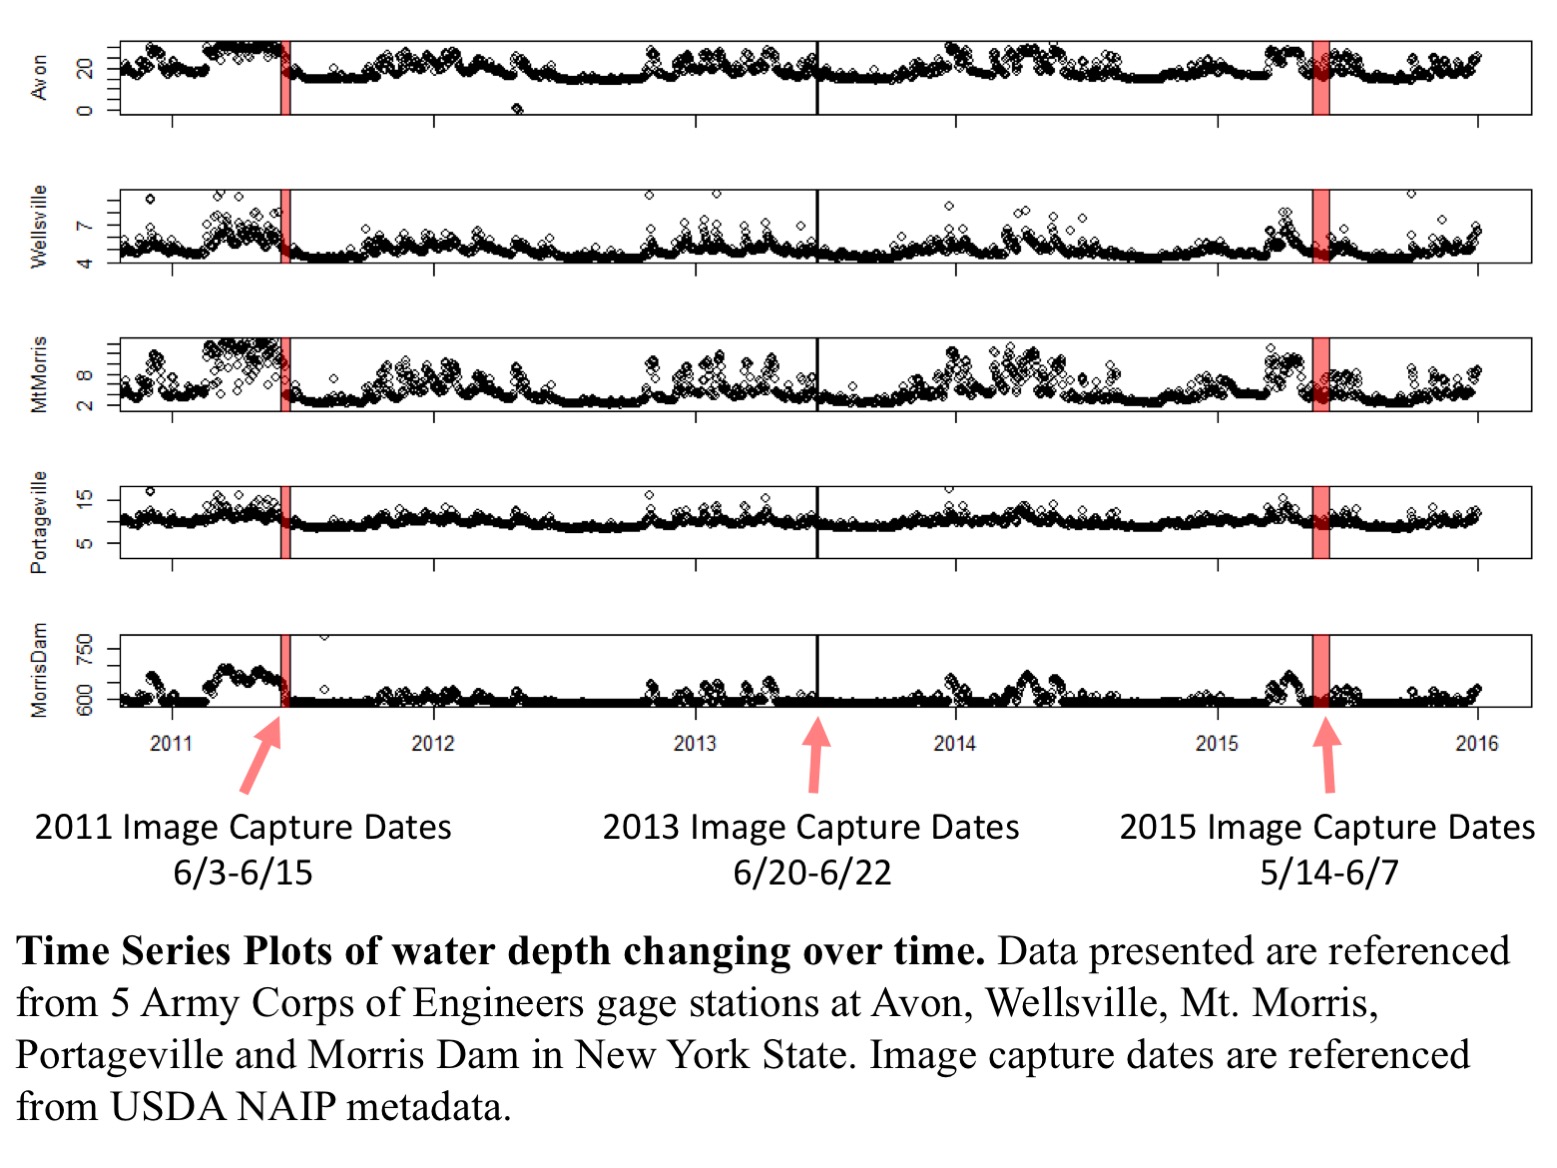 time series plots of water depth changing over time.